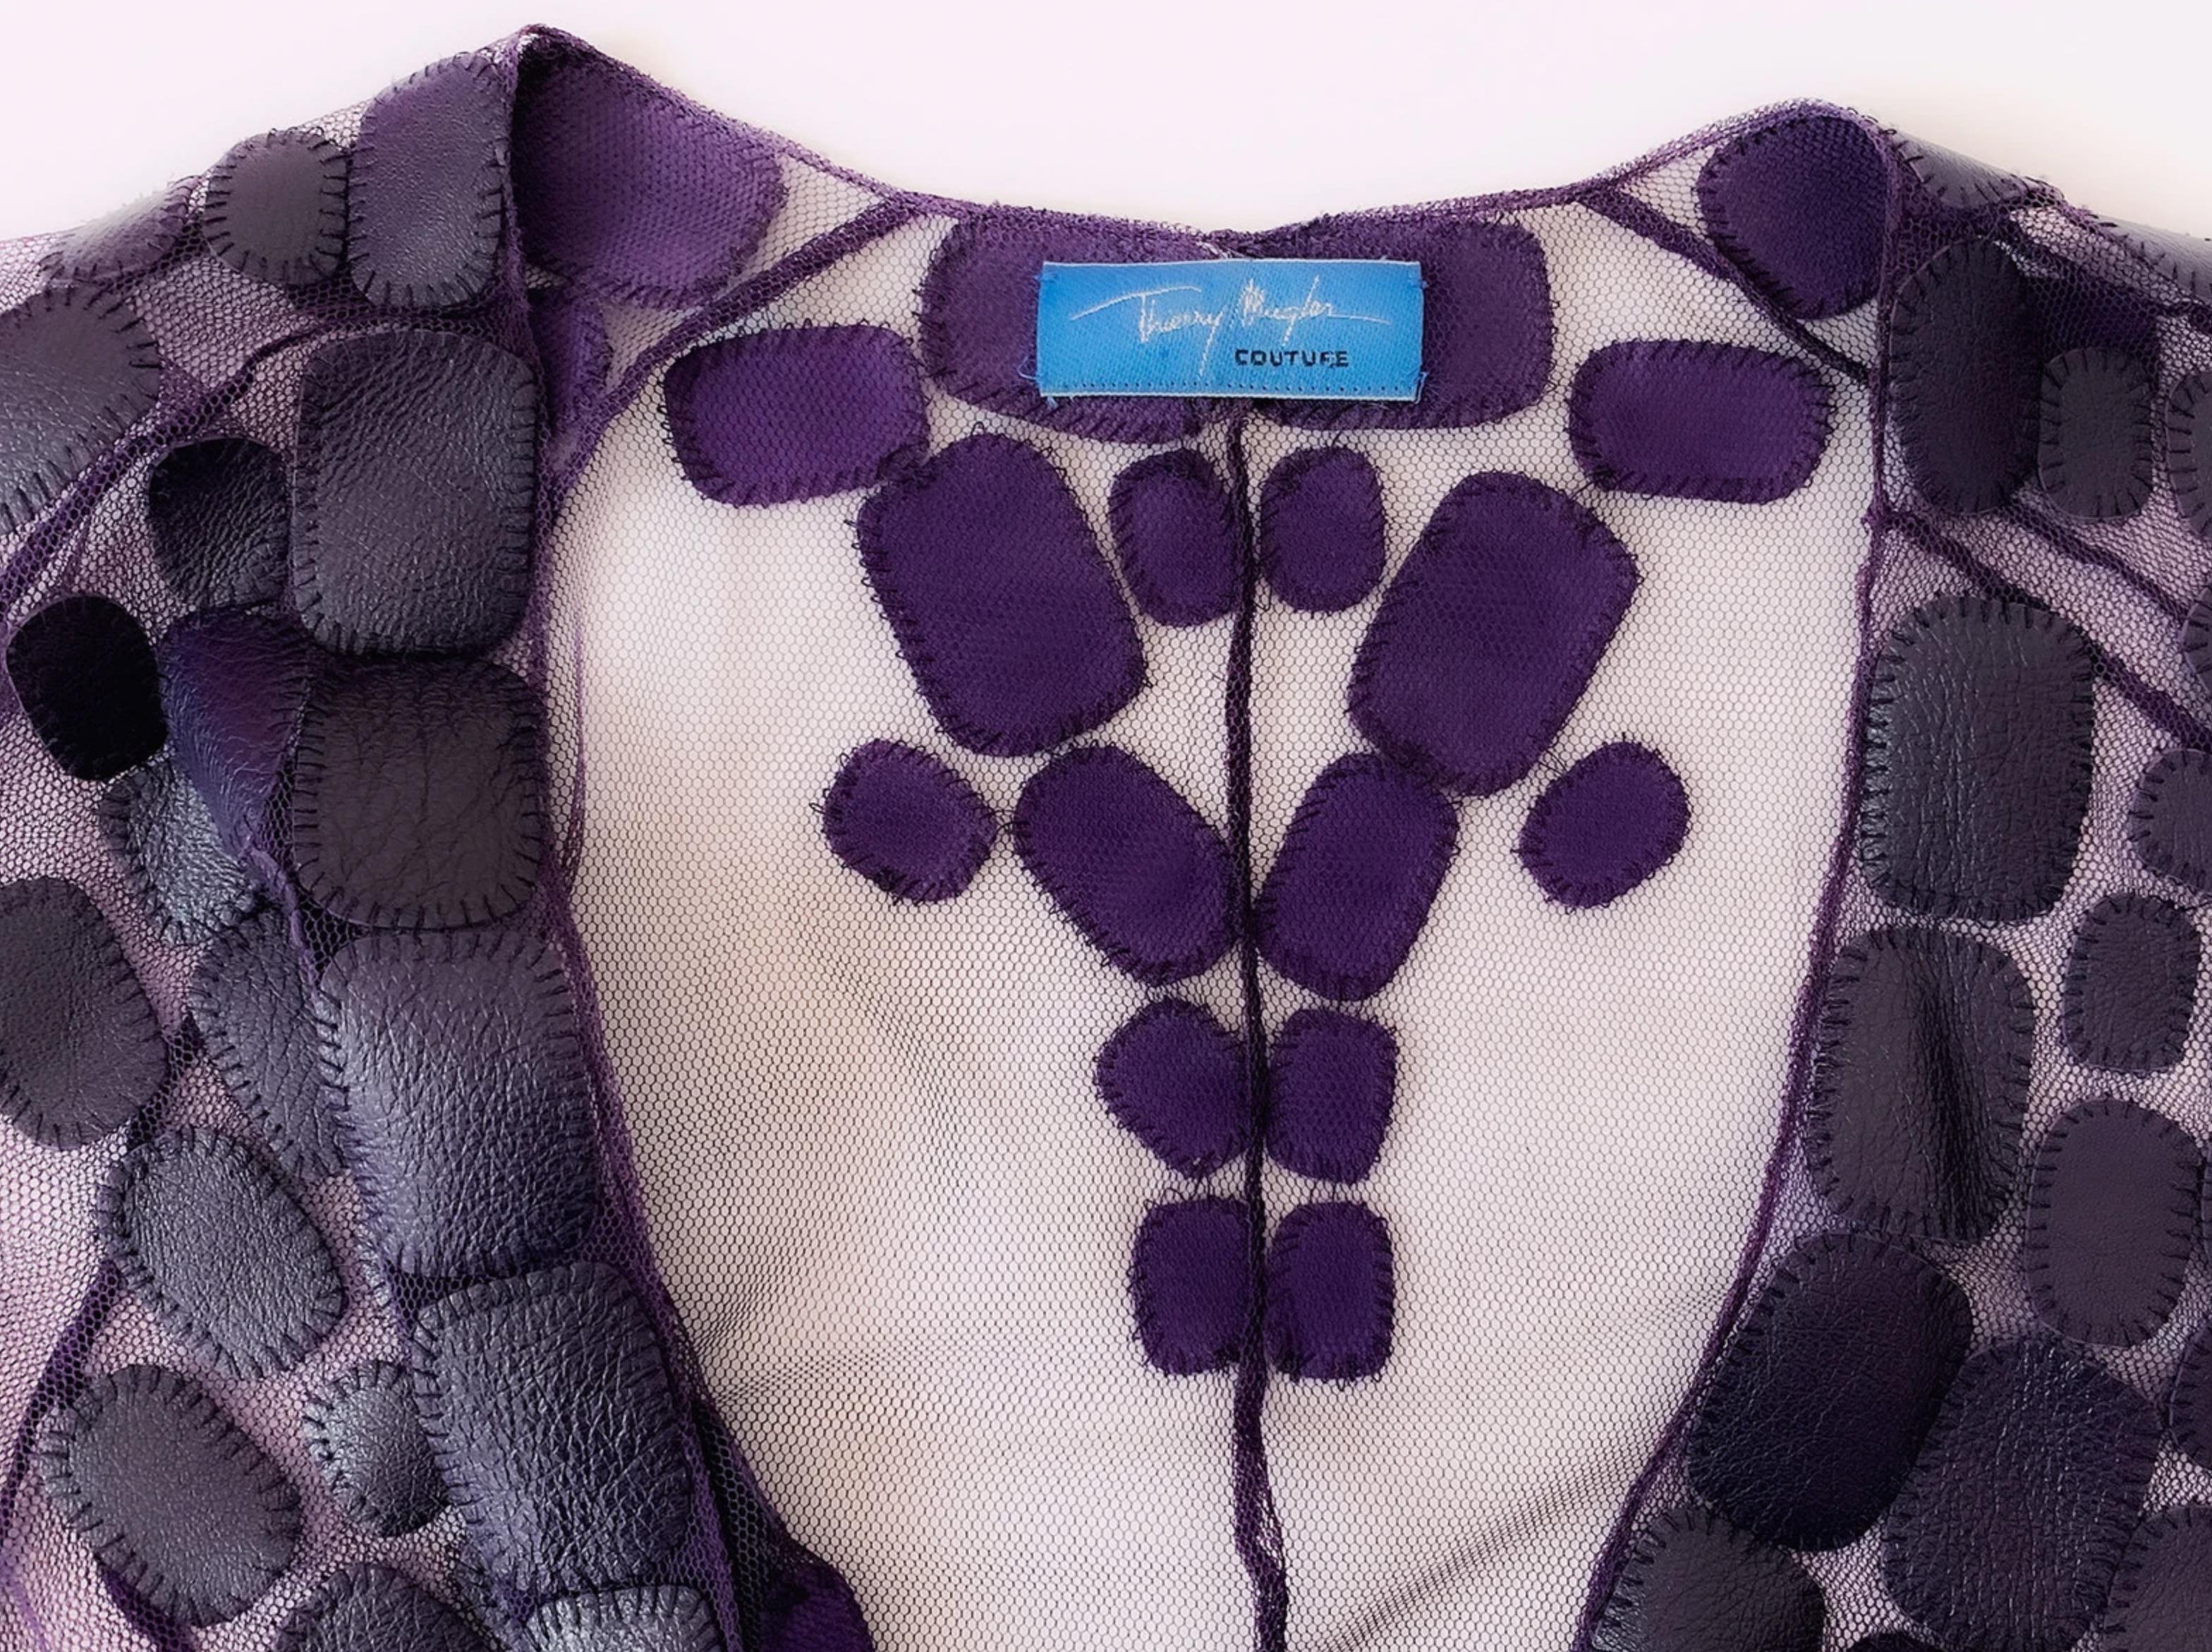 FABULOUS Thierry Mugler Couture SS 2001 Les Solaris Blouse Top Sheer Net Leather In Excellent Condition For Sale In Berlin, BE